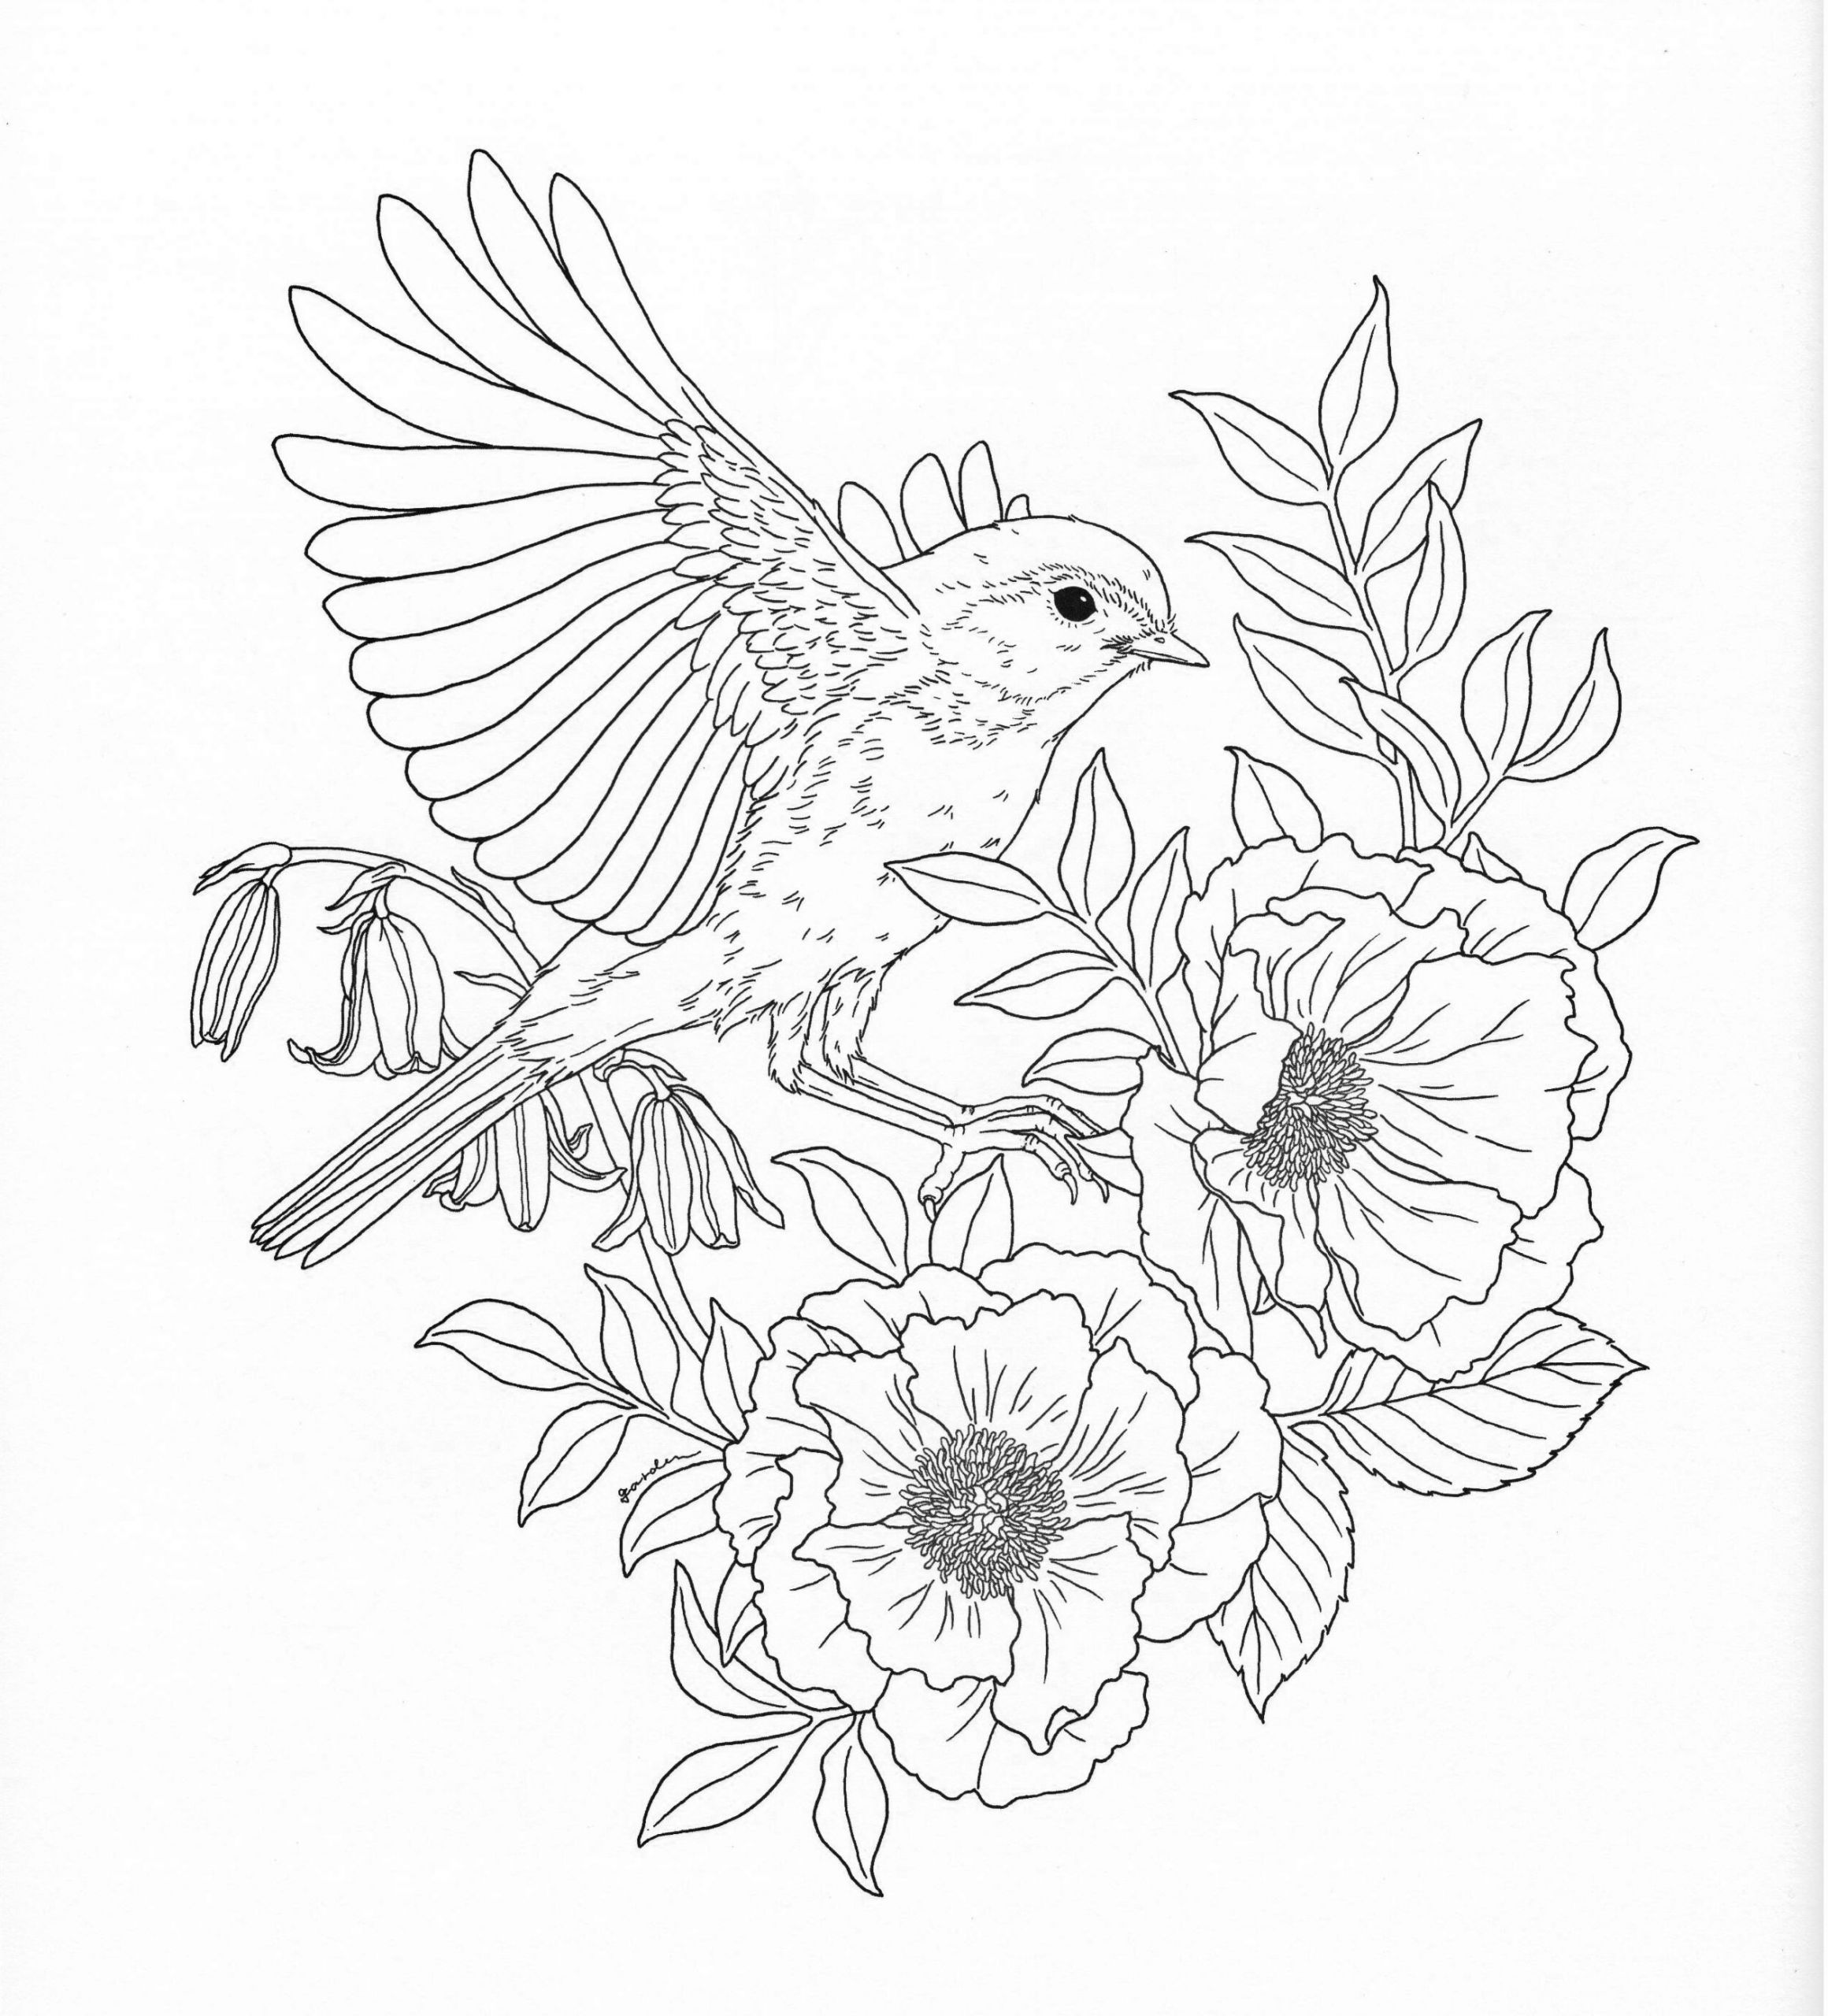 Nature Coloring Pages For Adults
 Harmony Nature Adult Coloring book Pg 26